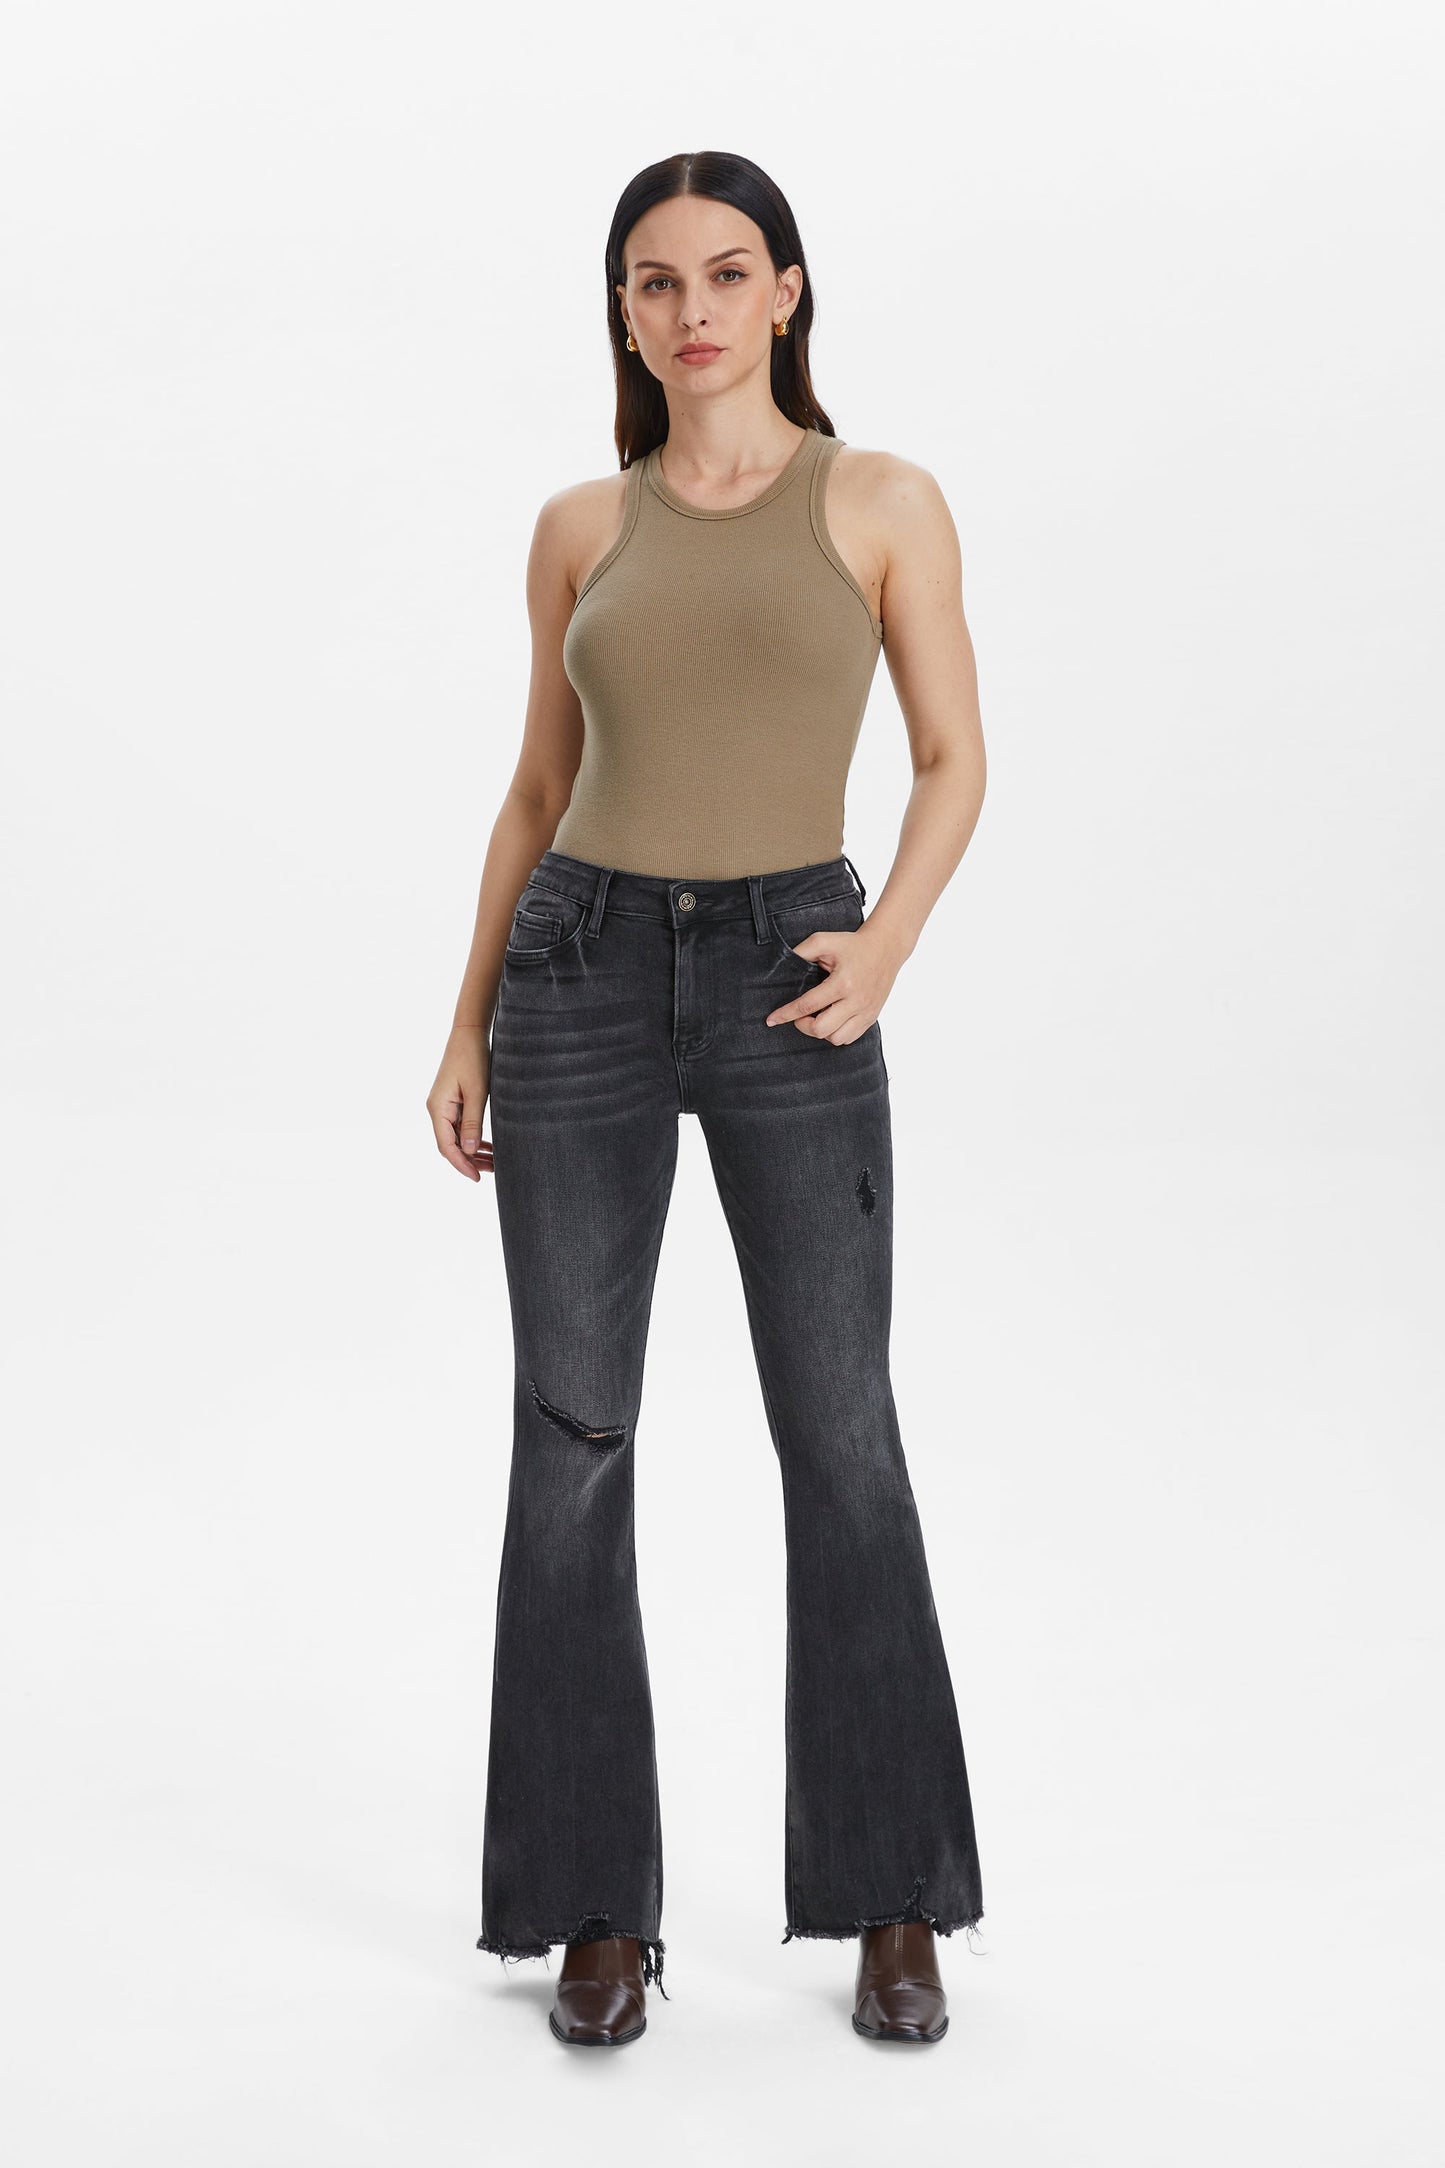 MID RISE FLARE JEANS WITH RAW EDGE HEM BYF1018-1 BLACK ICE